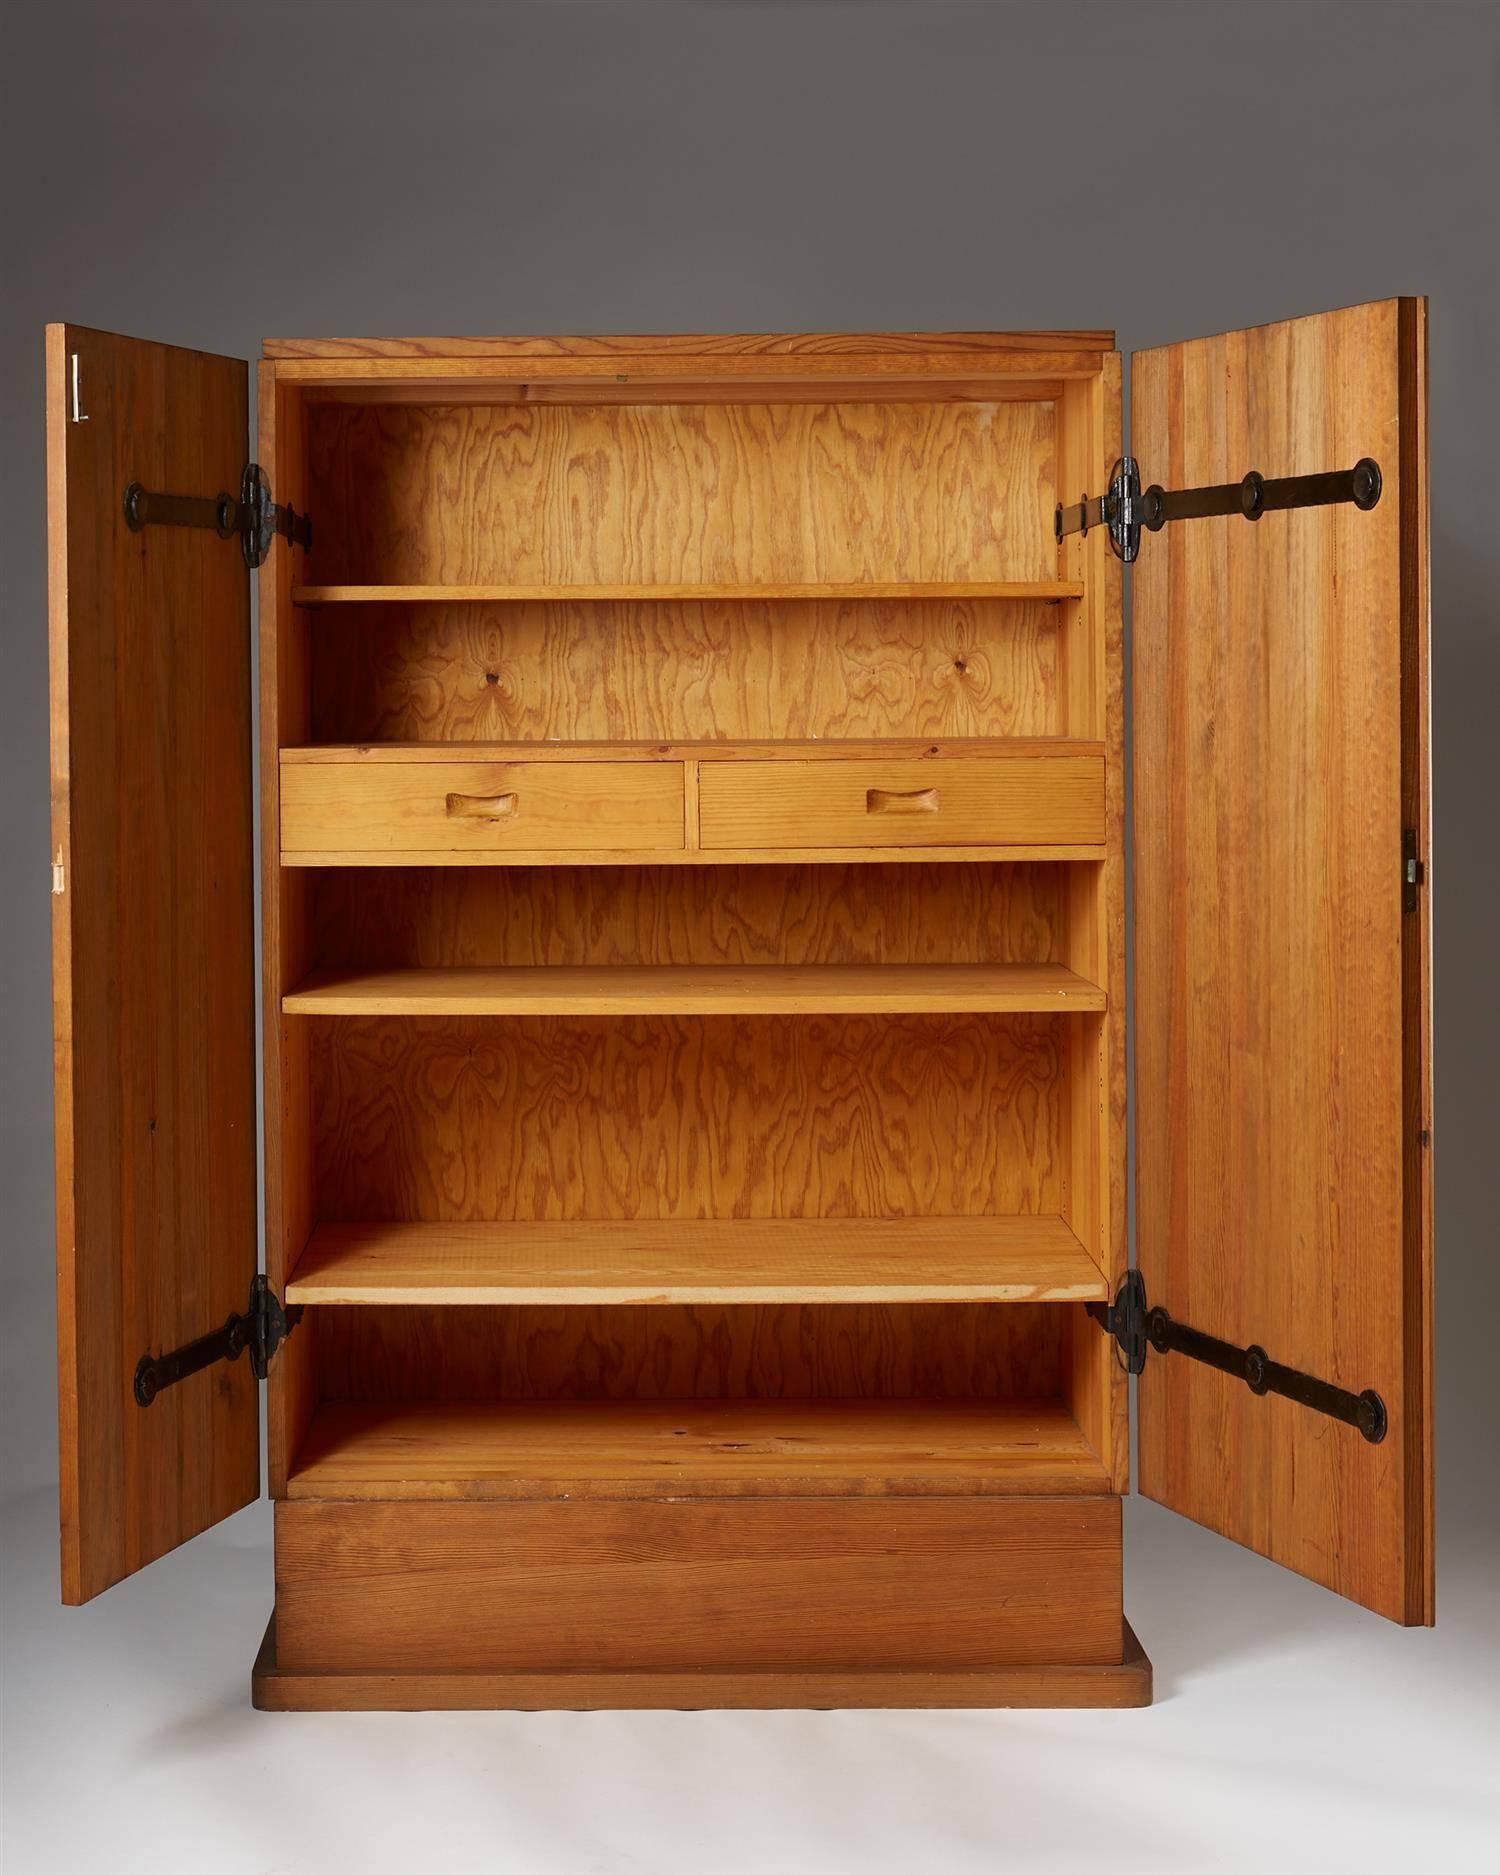 Cabinet Lovö, designed by Axel-Einar Hjorth for NK, Sweden. 1932.
Pine and forged iron.

H: 156 cm/ 5' 1 1/2''
W: 100 cm/ 39 1/2''
D: 45 cm/ 17 3/4''